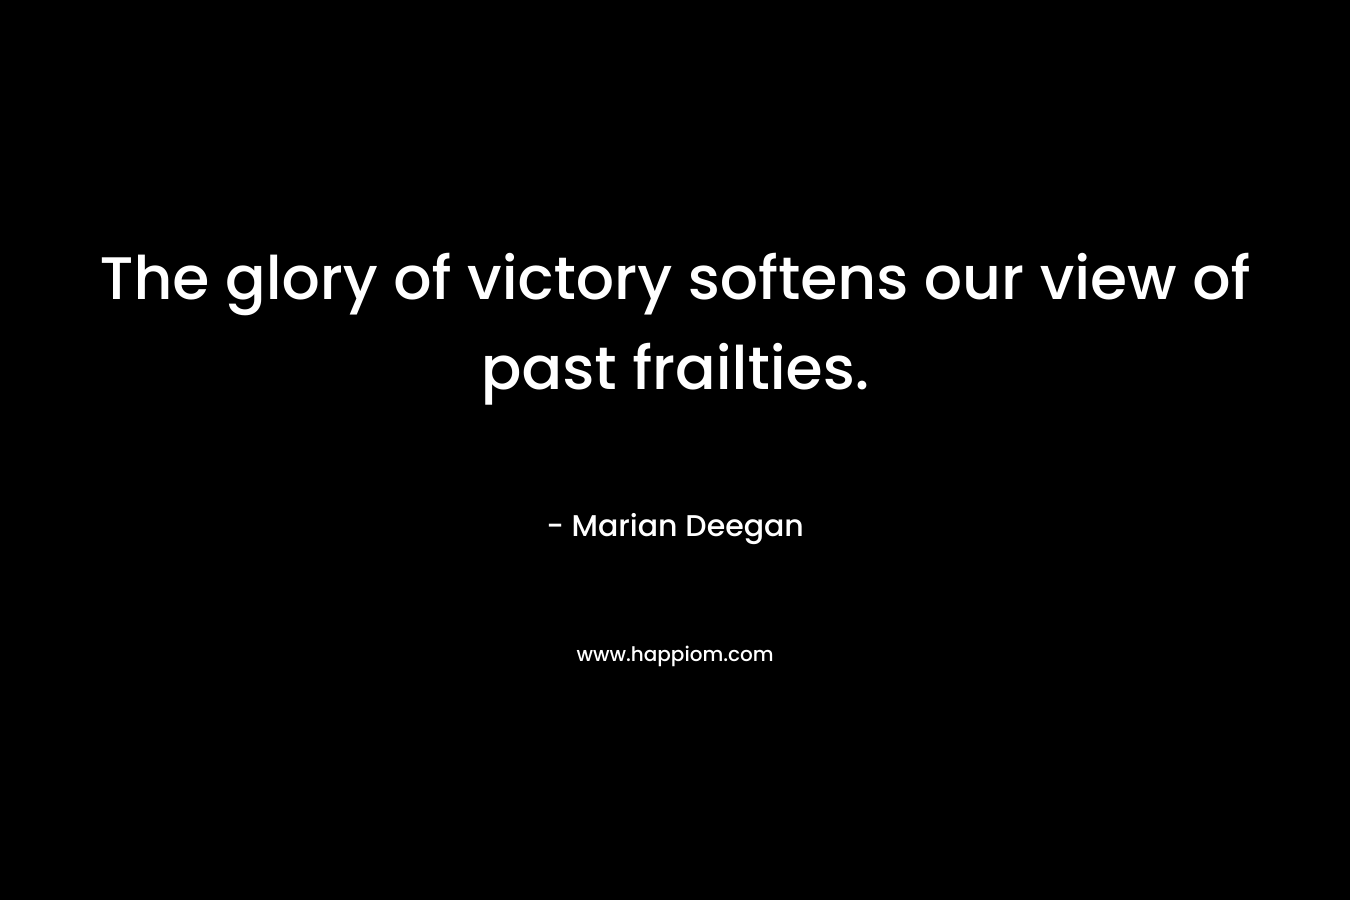 The glory of victory softens our view of past frailties. – Marian Deegan